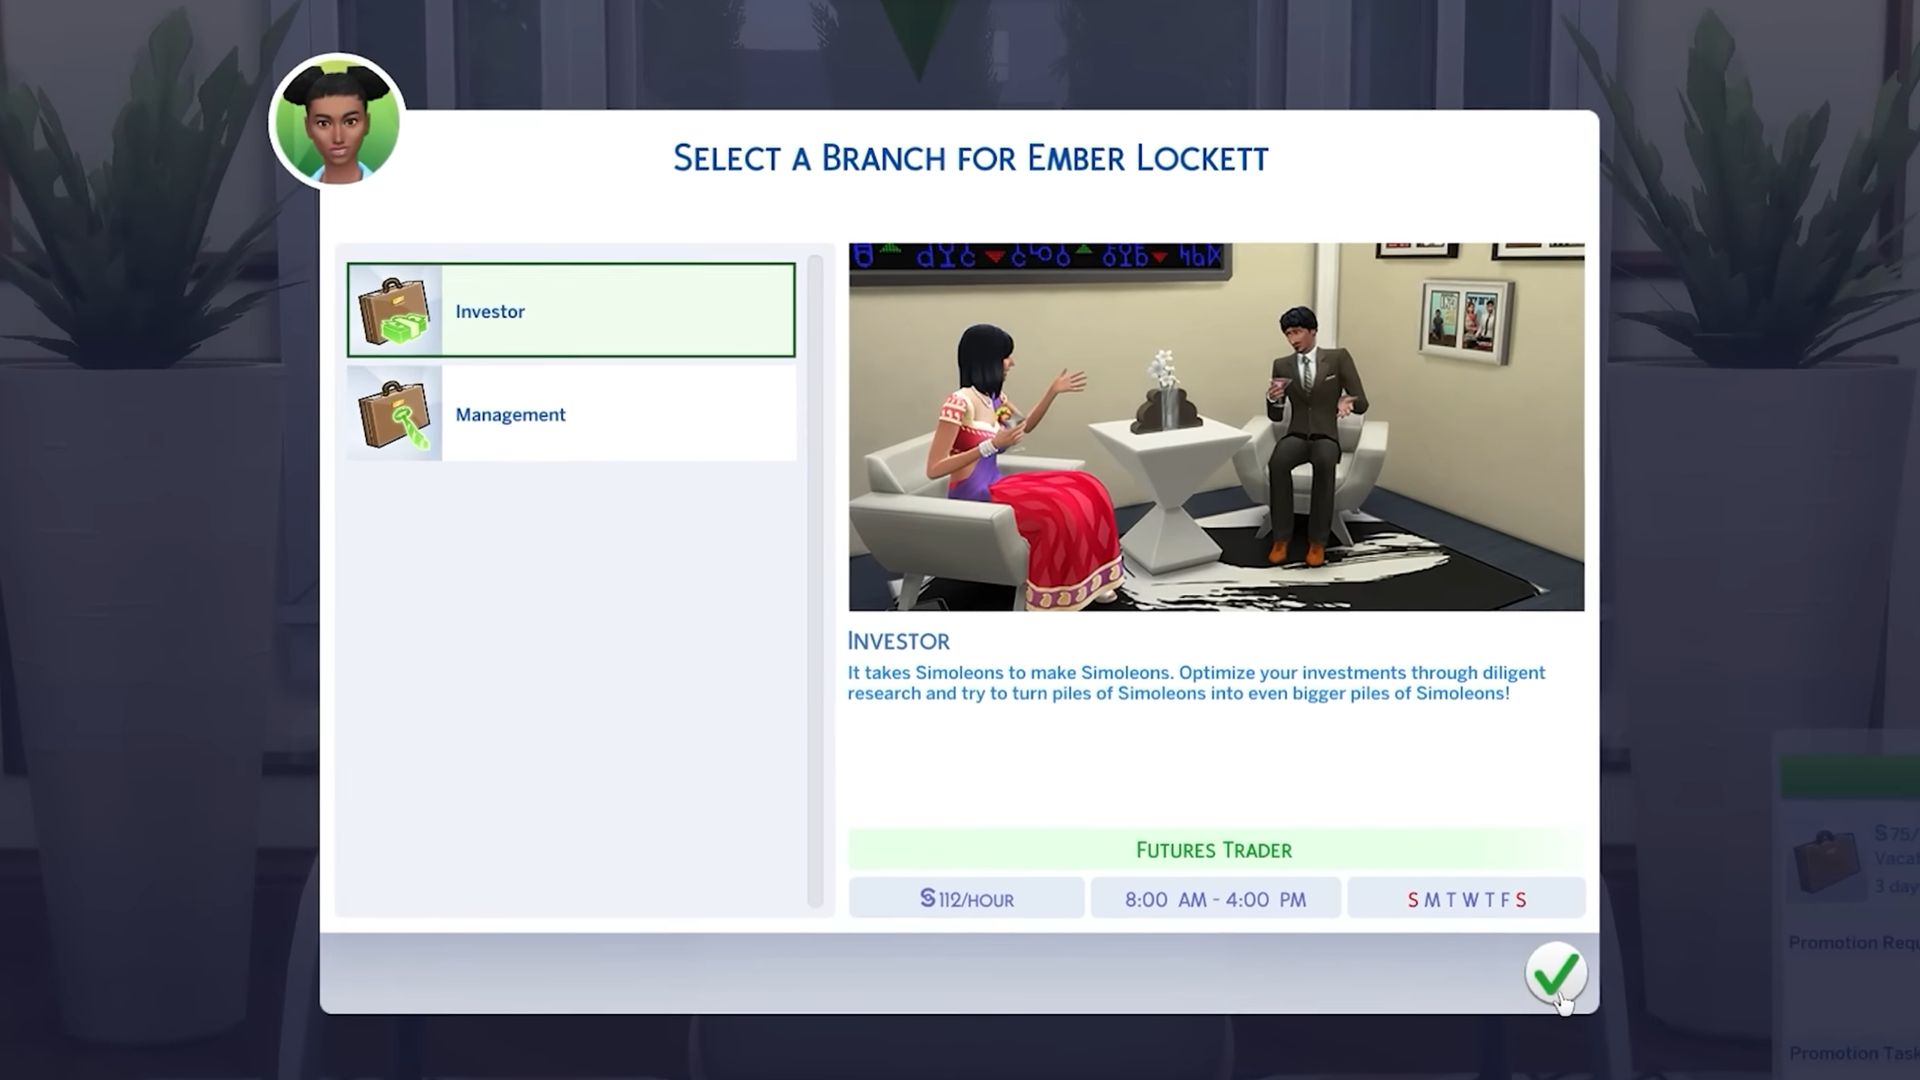 Sims 4: How to Invest in the Game [Full Guide]